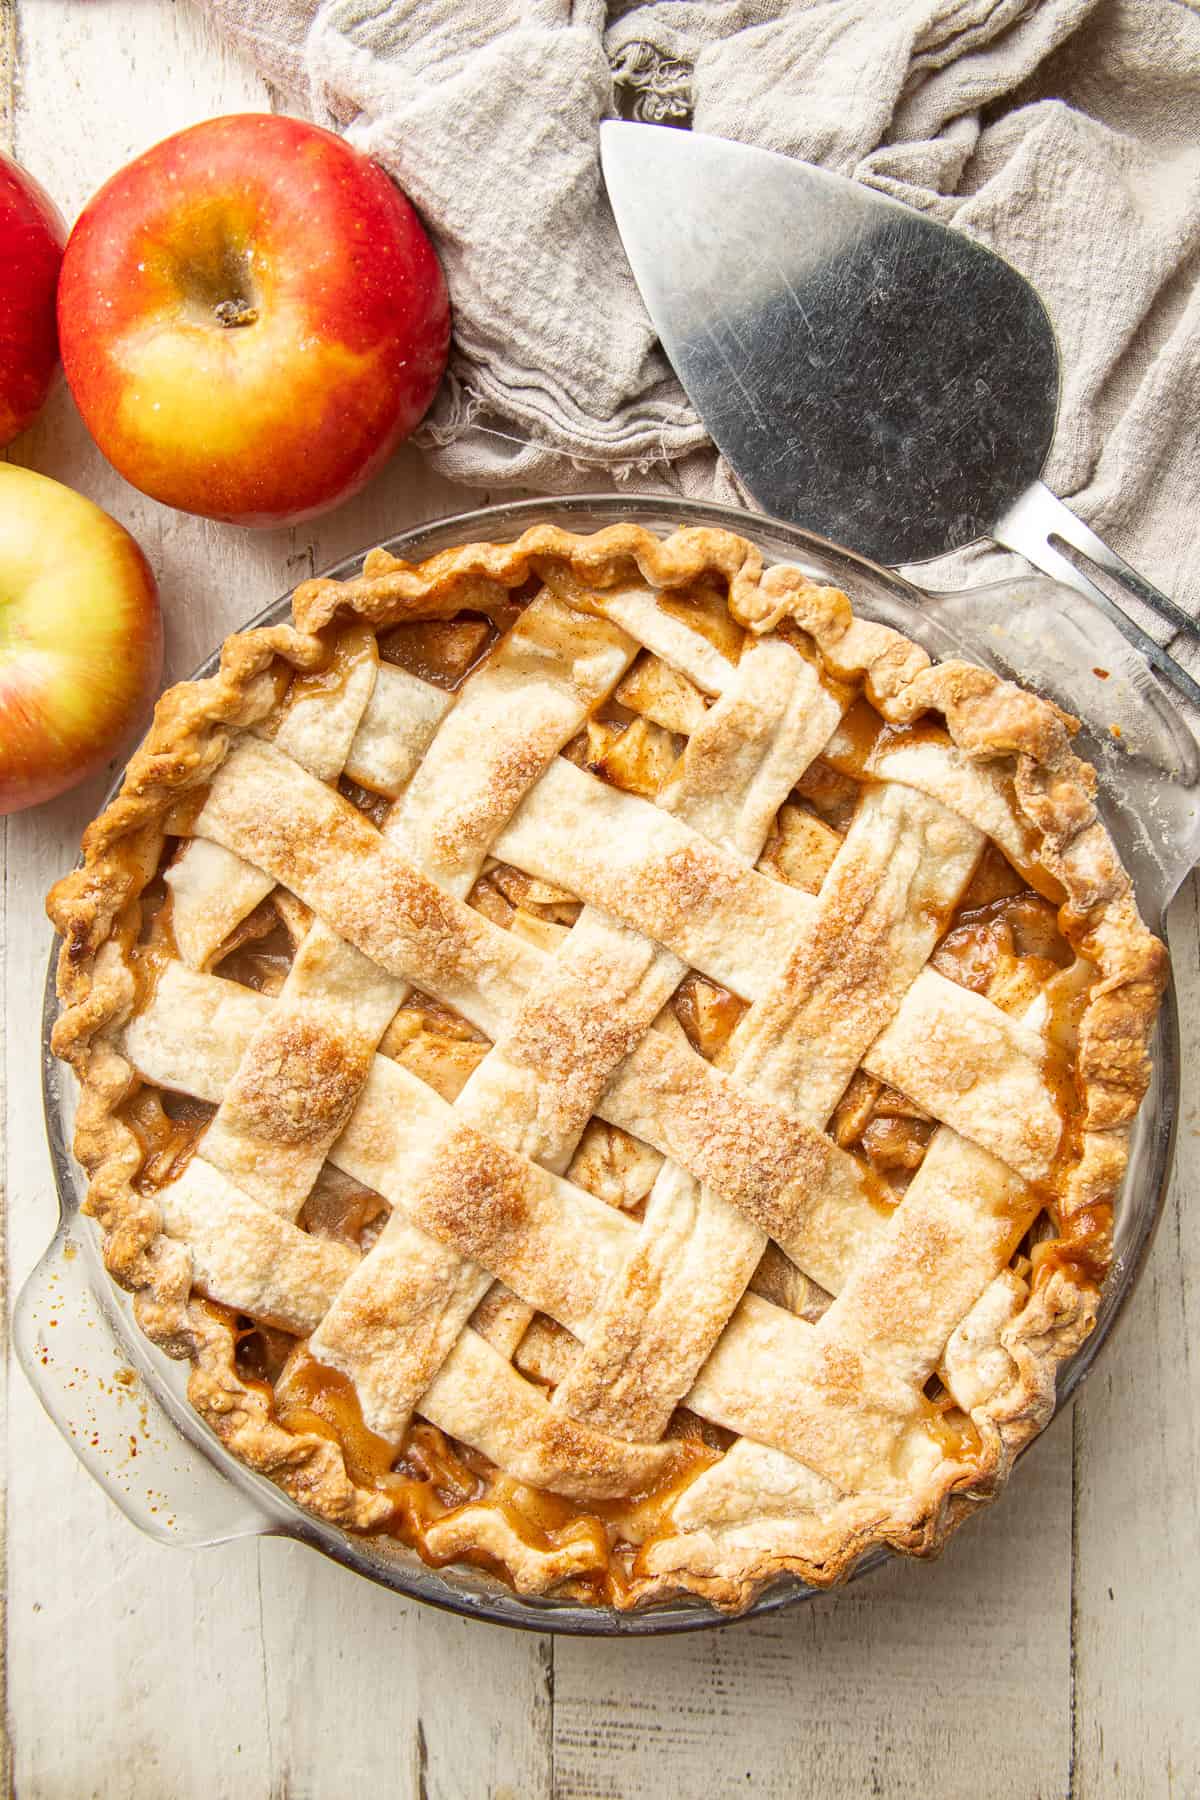 Whole vegan apple pie with pie server and apples on the side.